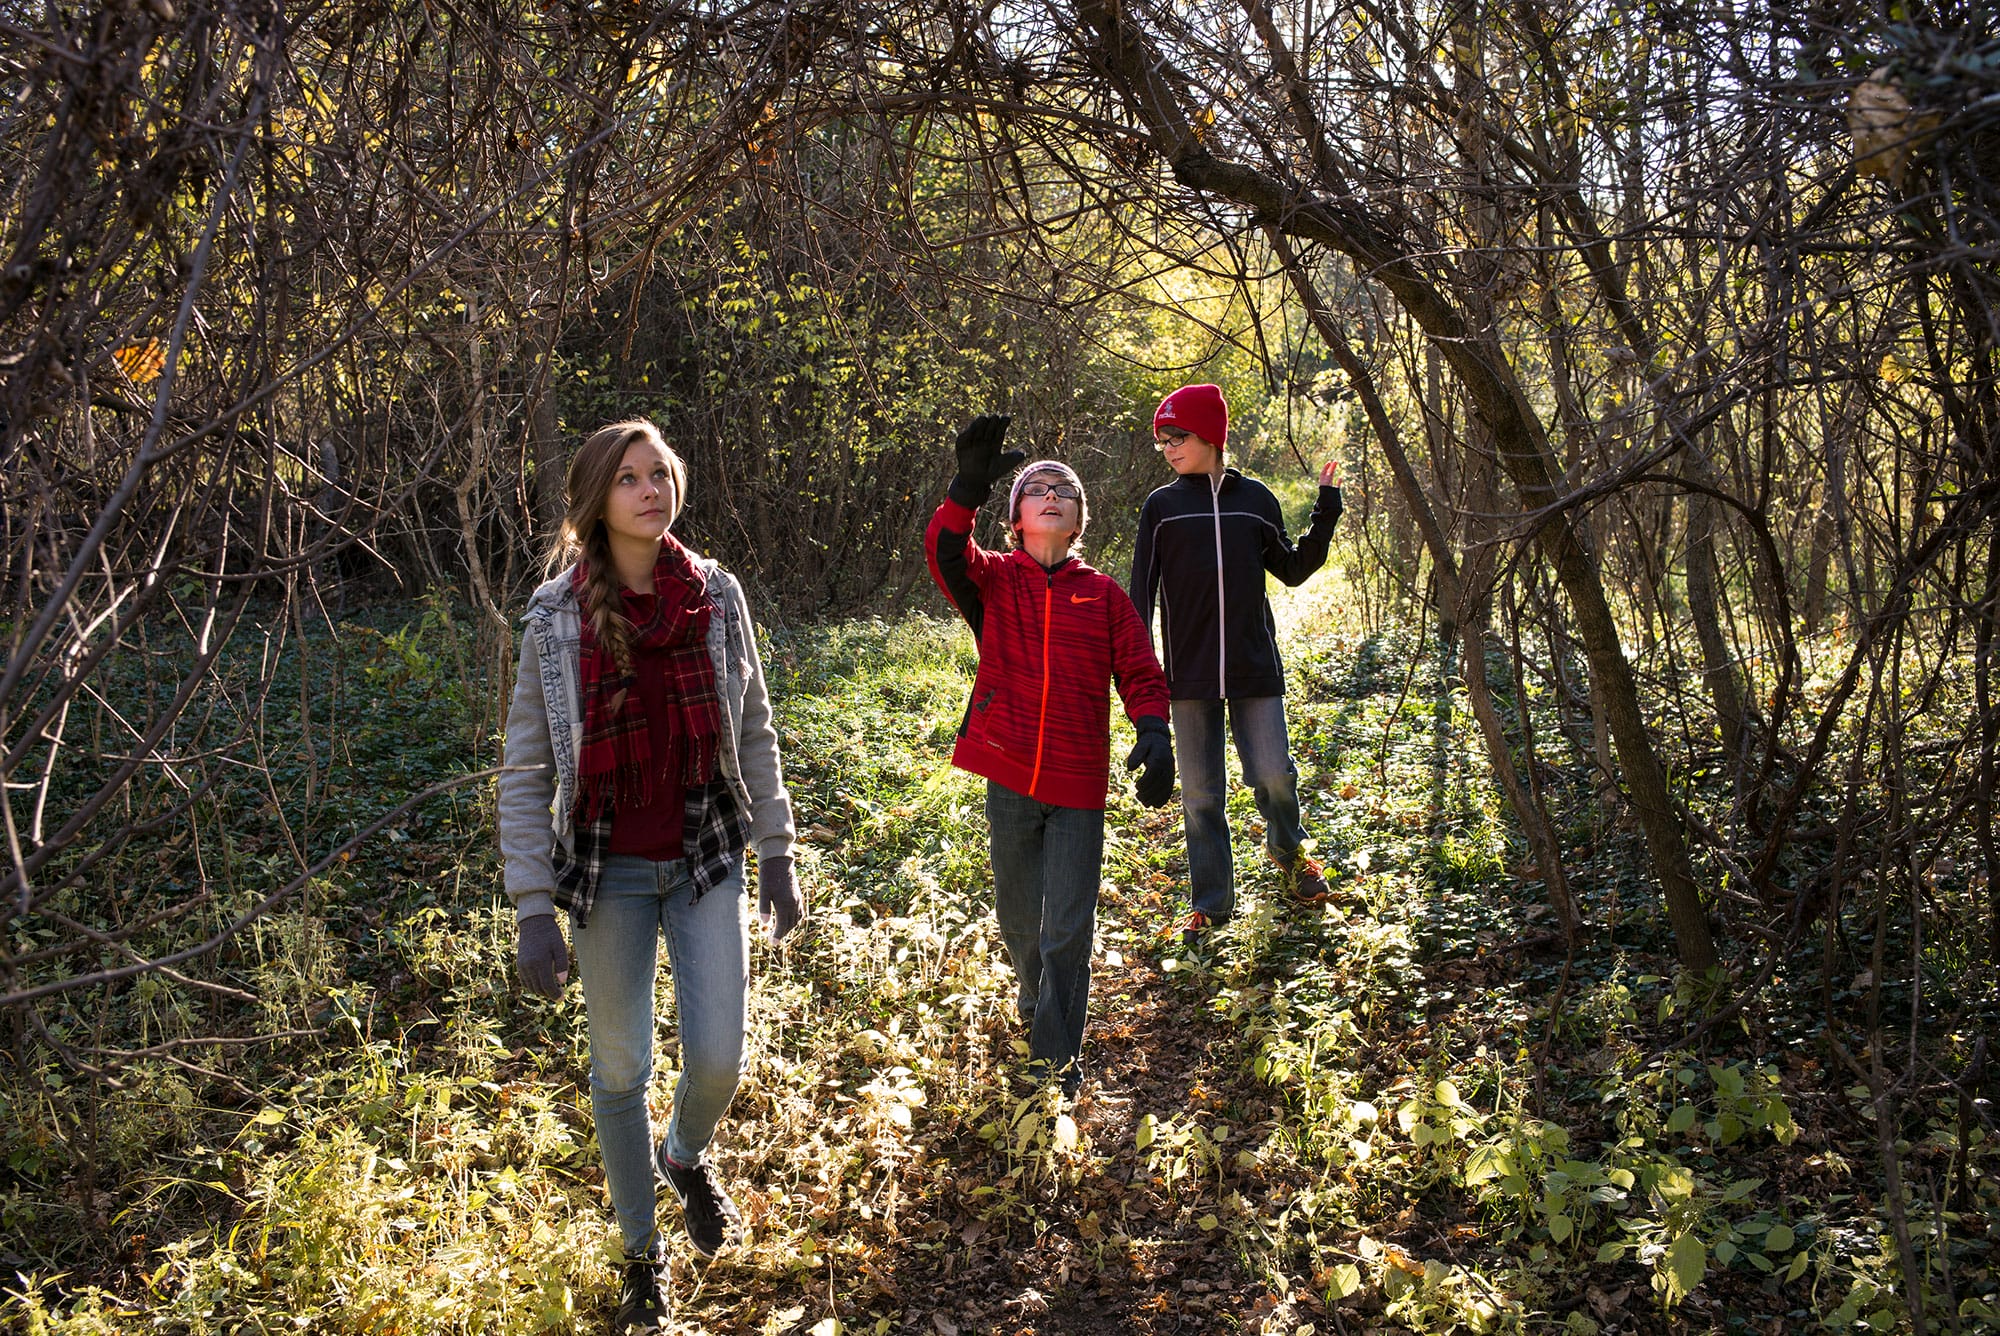 A group of people walking through a wooded area.